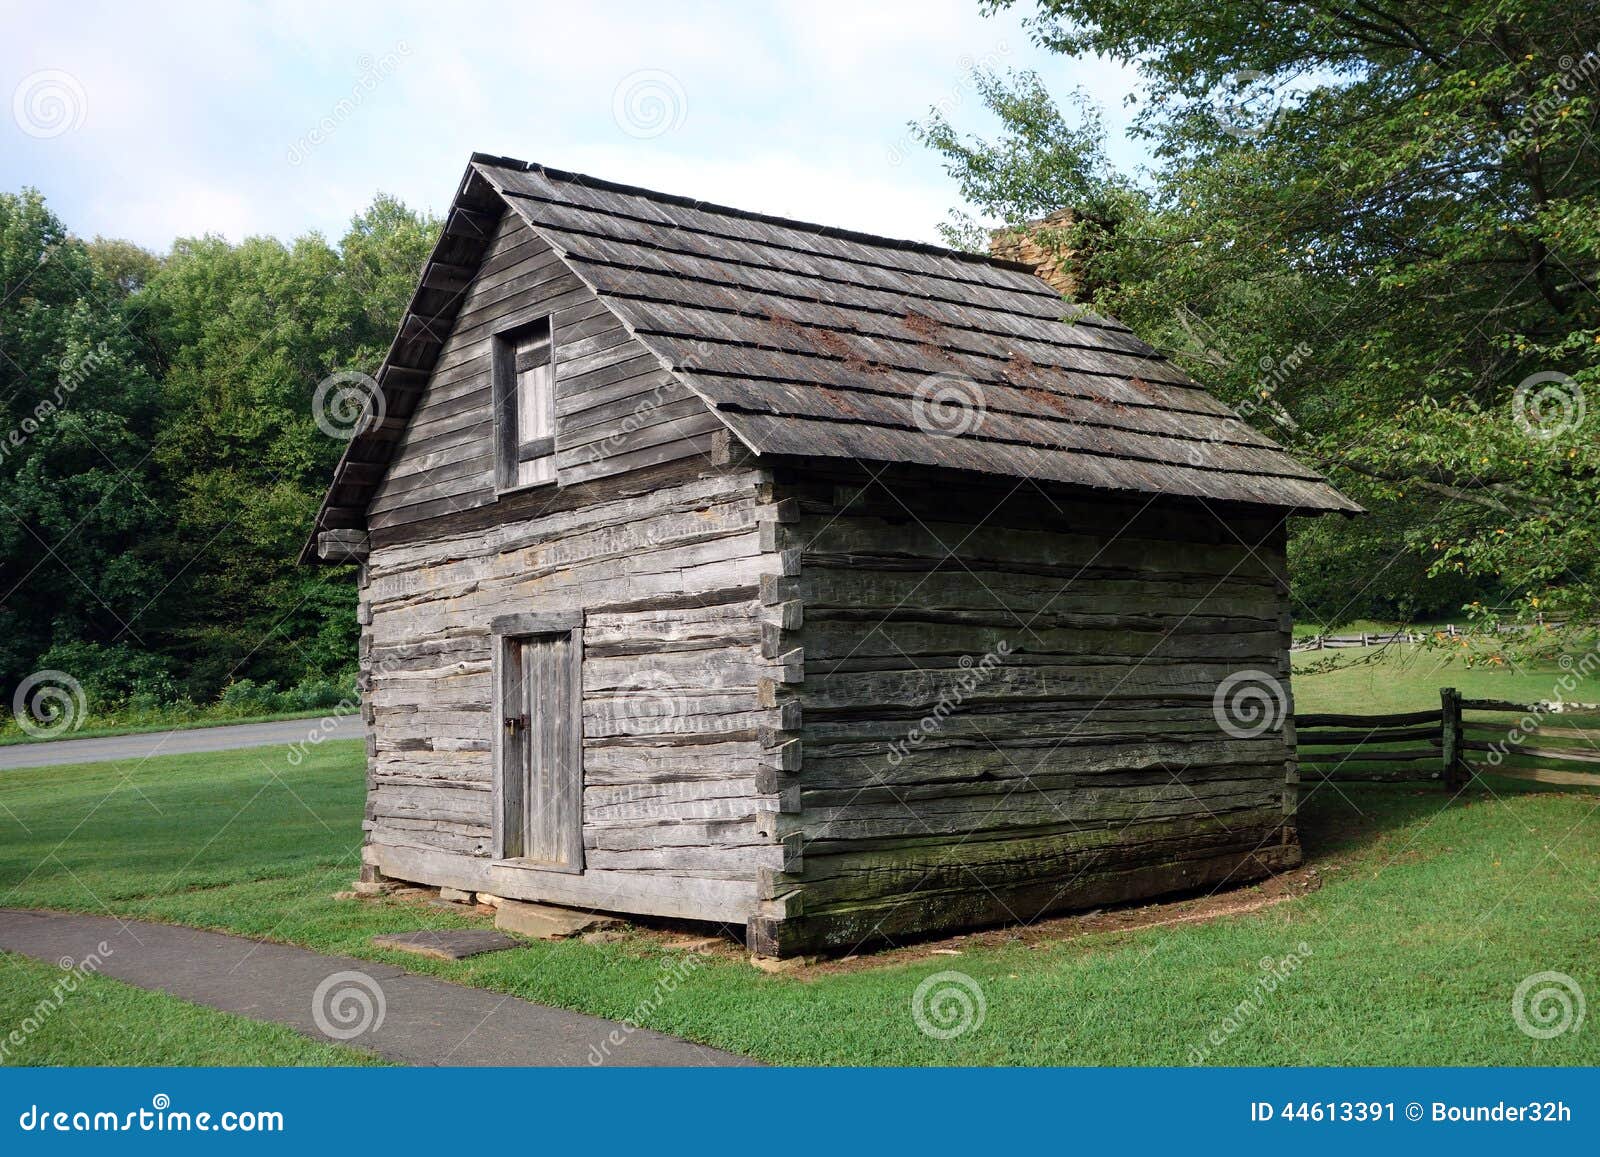 A Log Cabin from Pioneer Days Stock Image - Image of house, closed ...